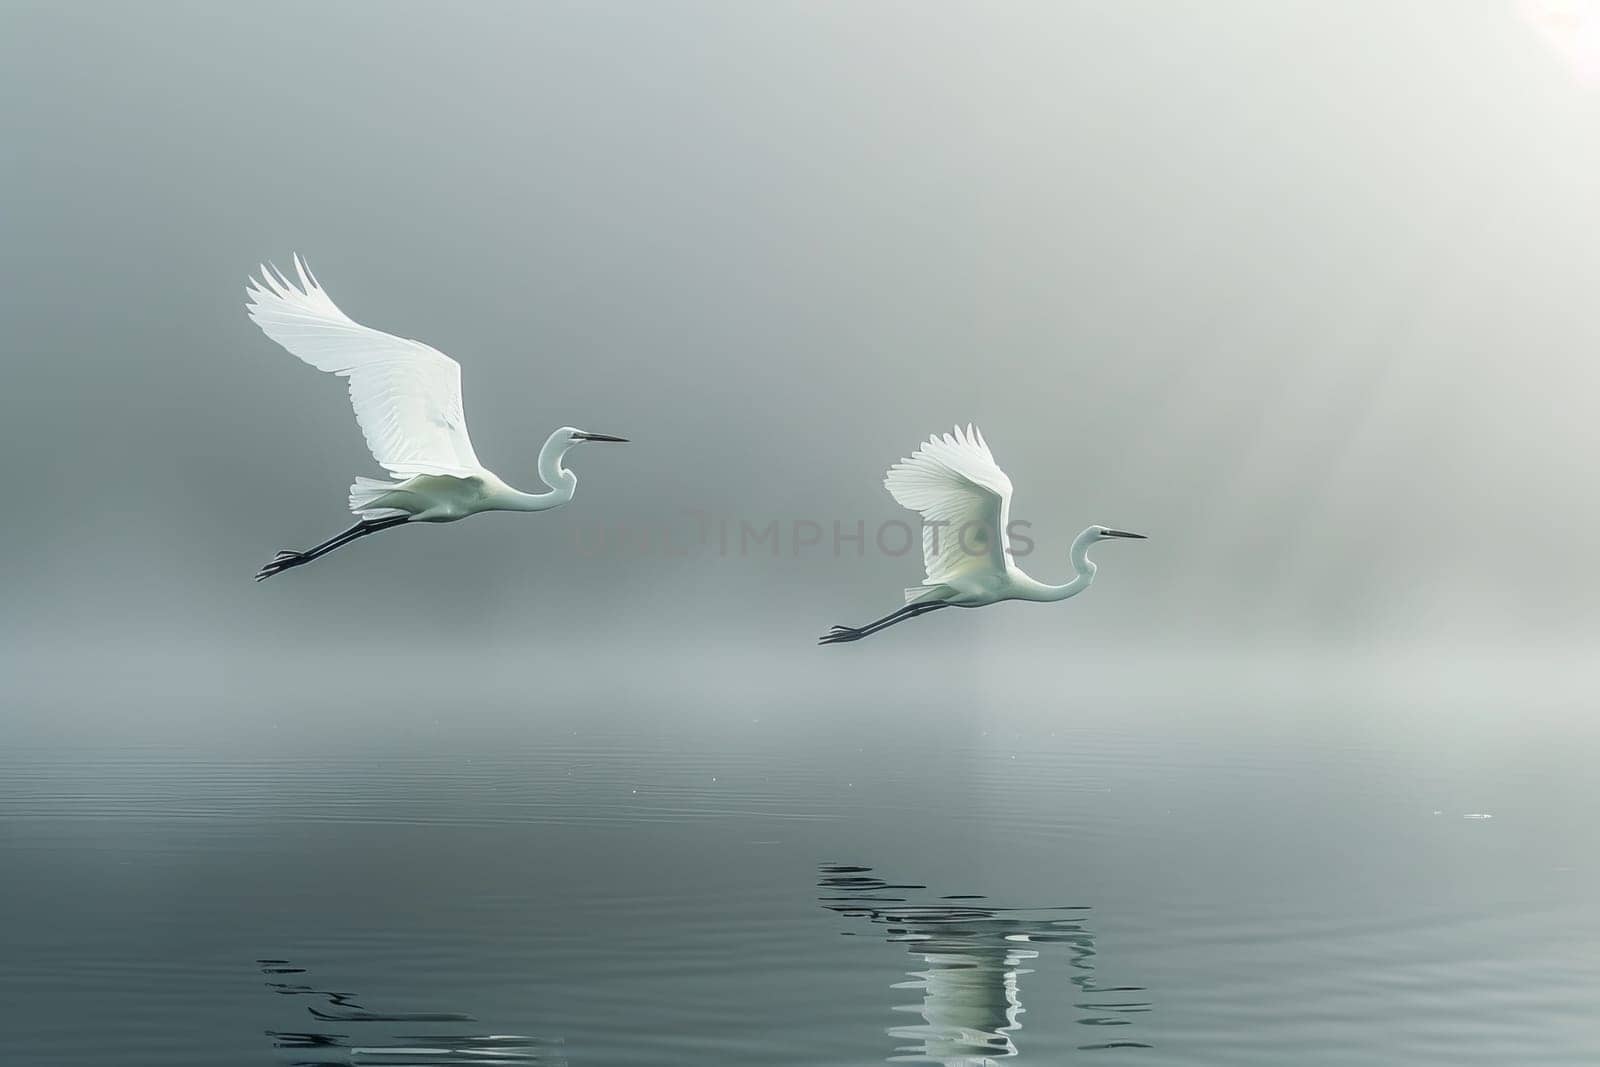 A white bird is flying over a body of water by itchaznong